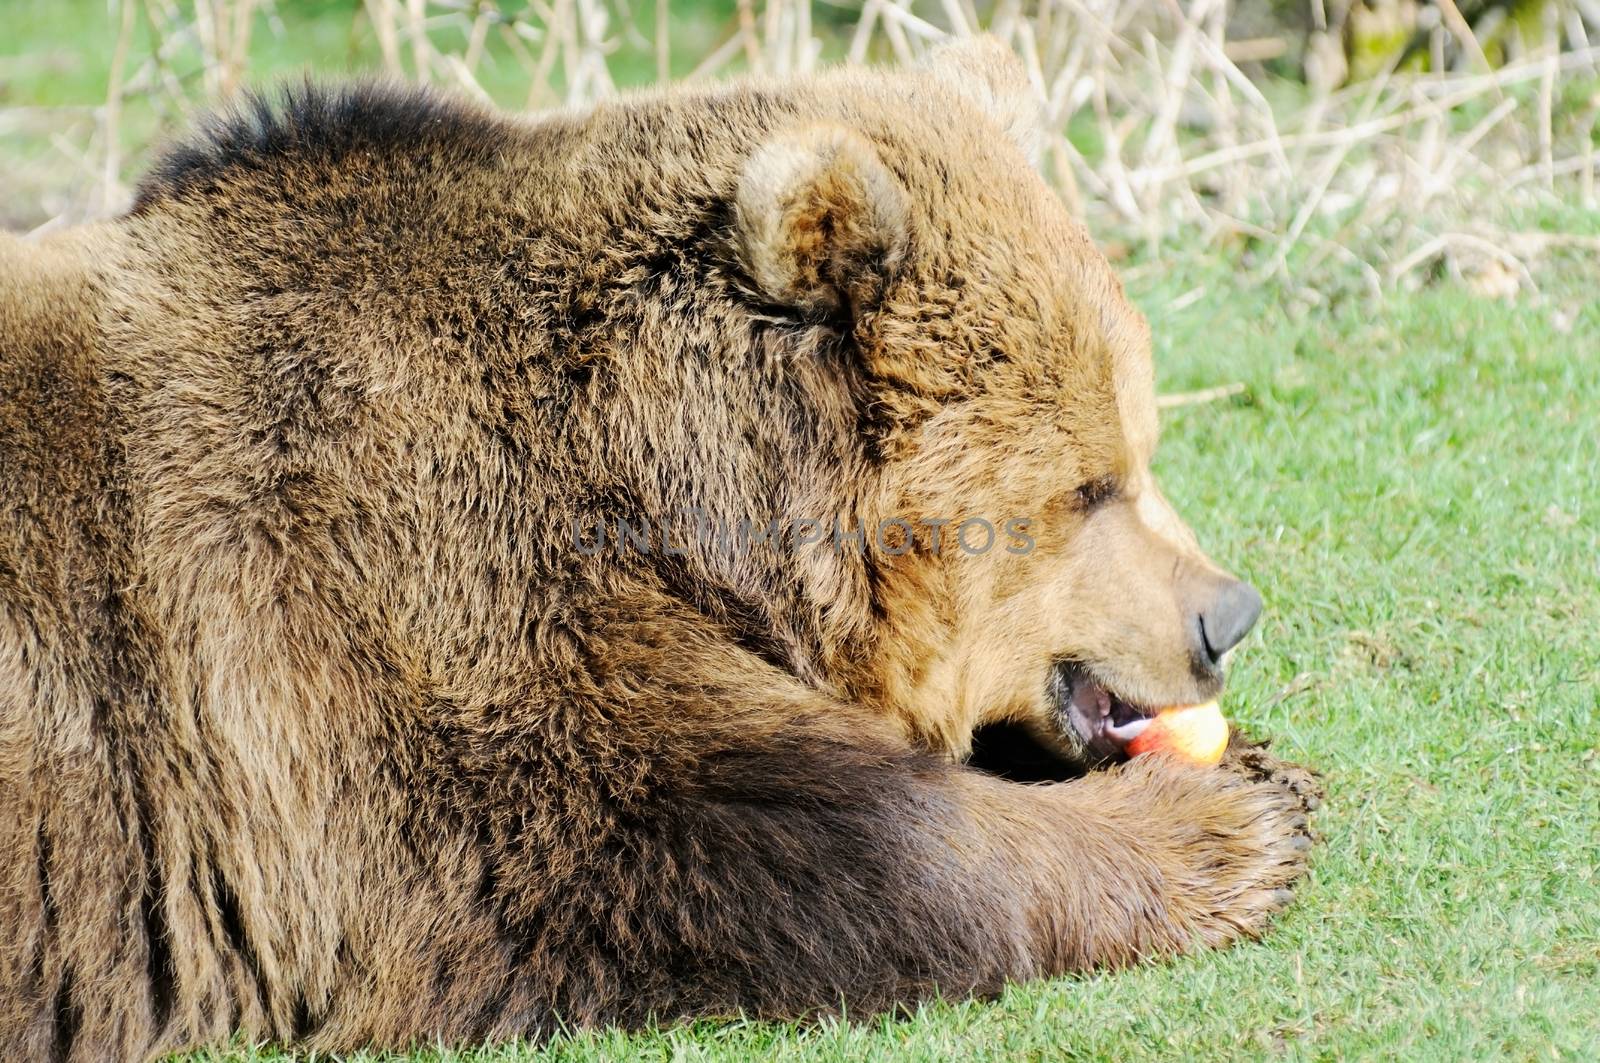 Brown Bear eating apple by kmwphotography